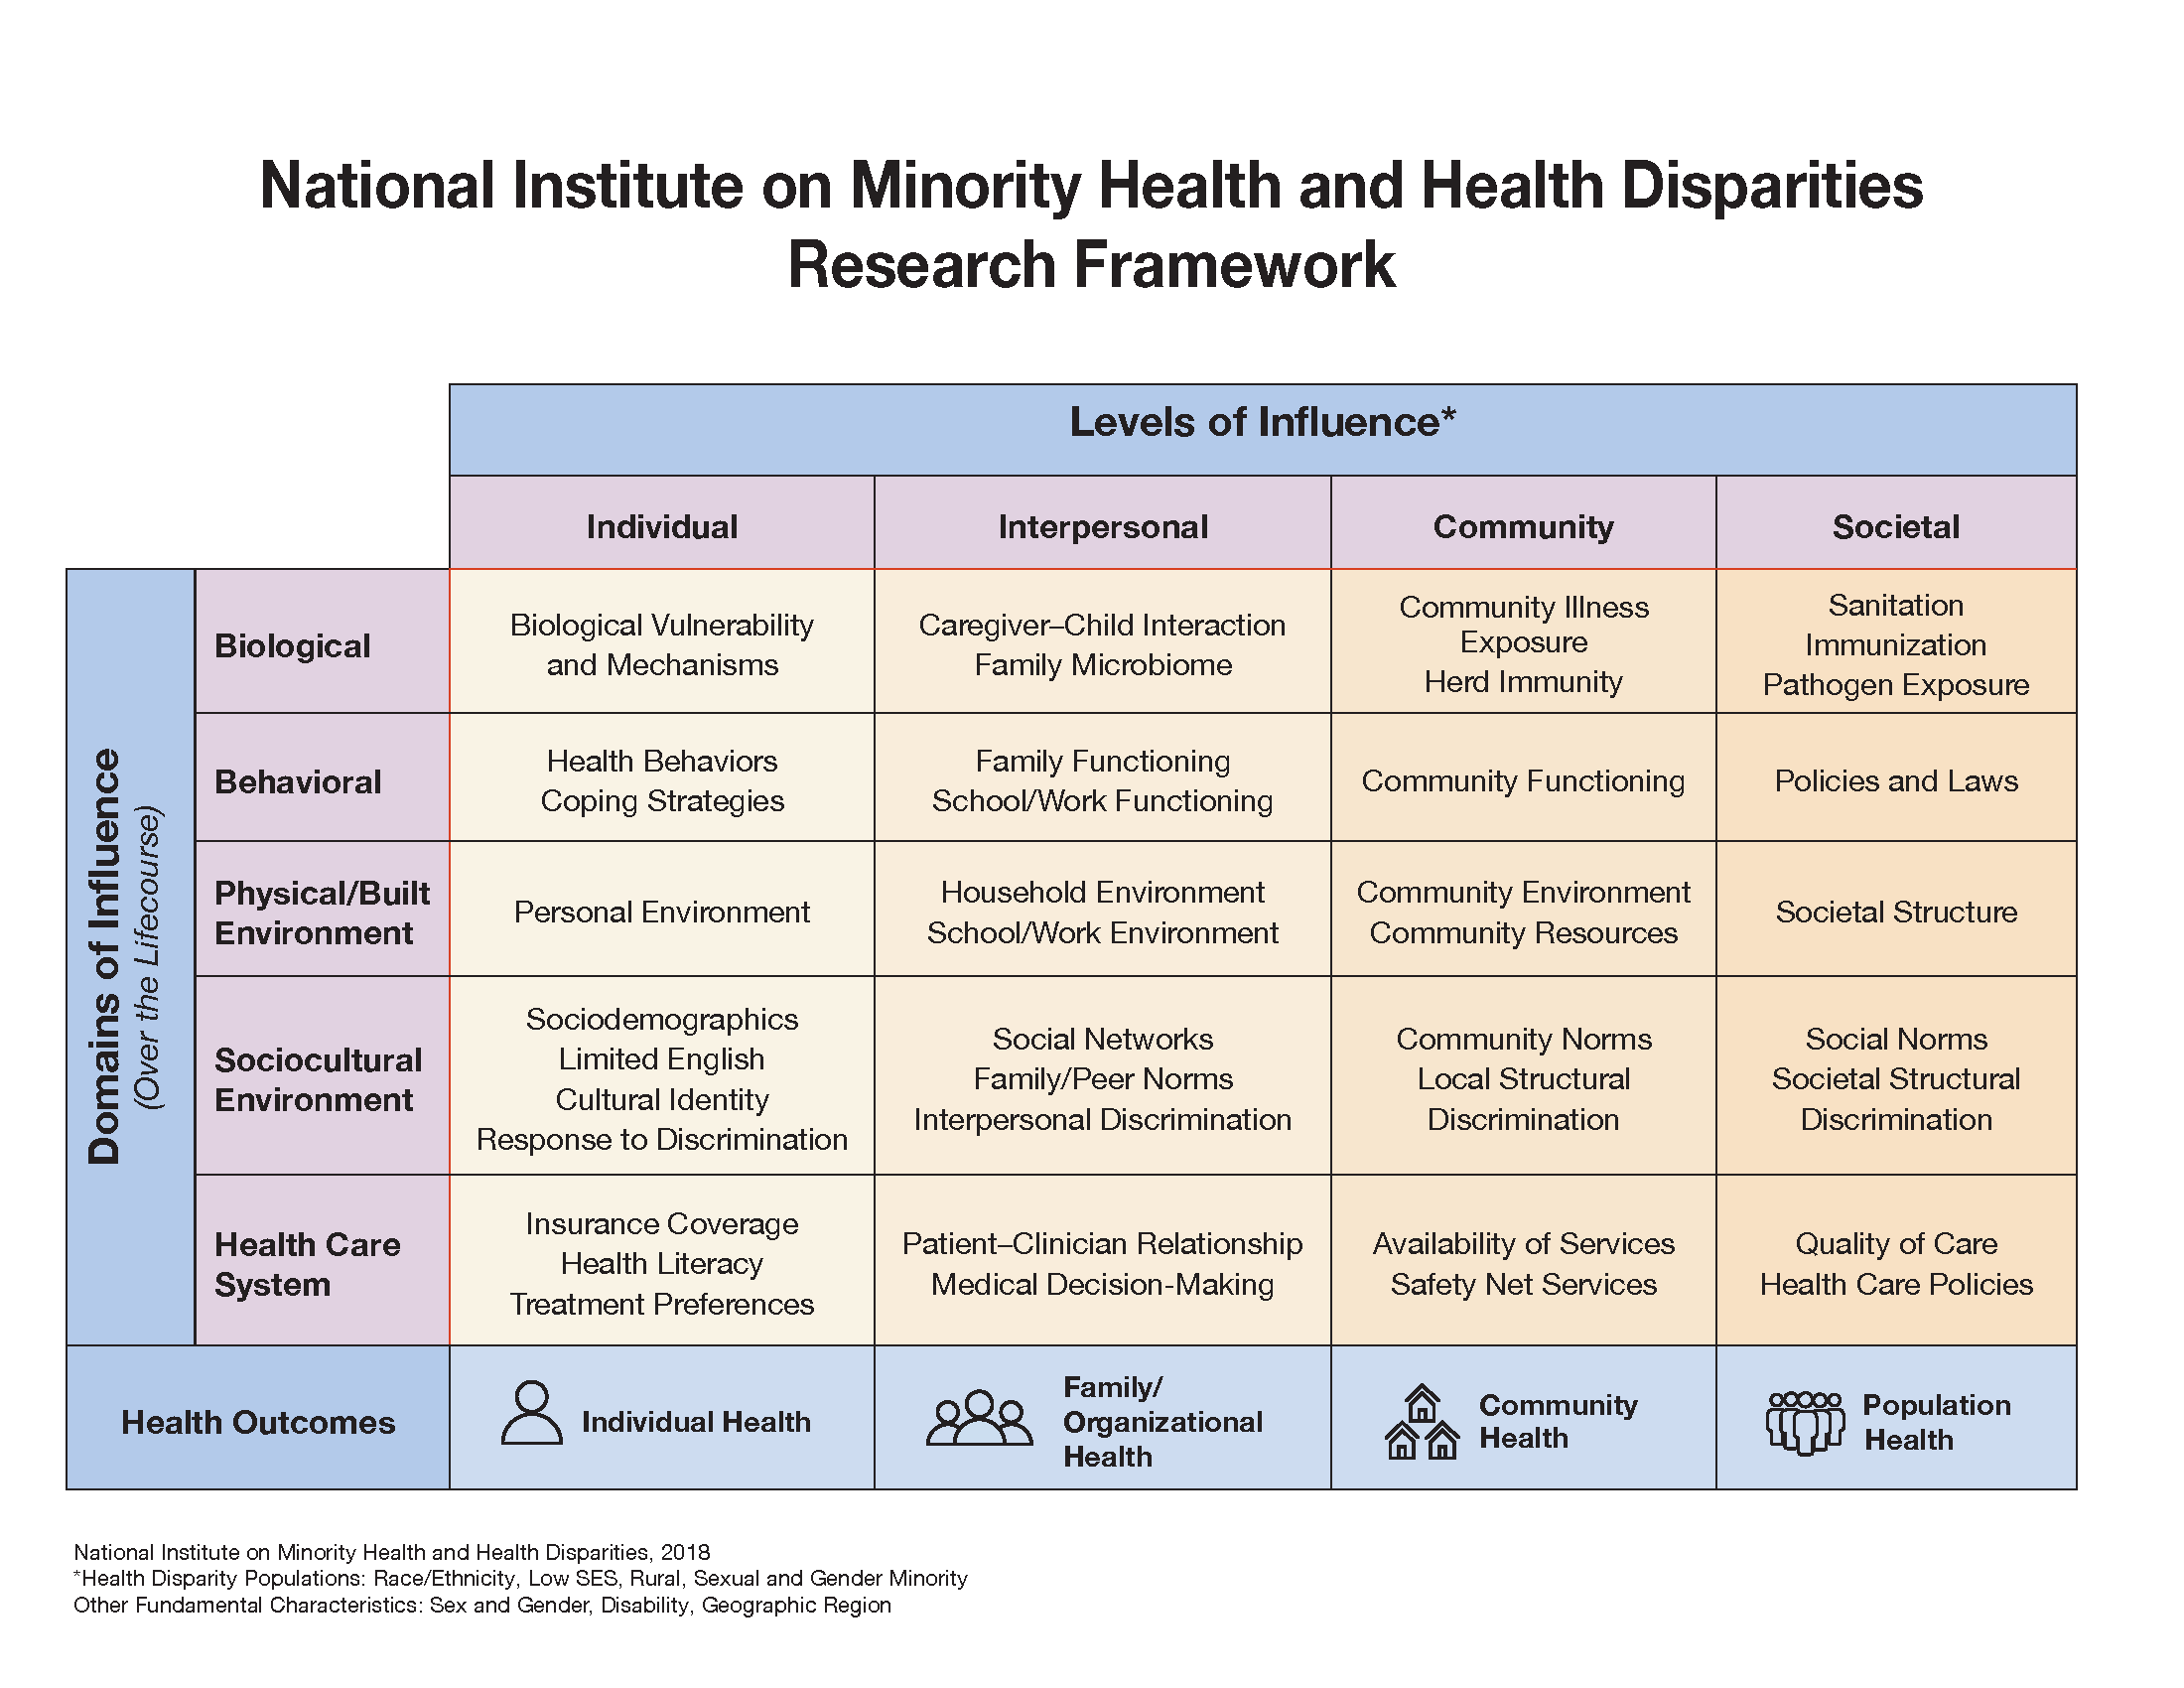 “NIMHD Minority Health and Health Disparities Research Framework. If you would like to read all the details of the cells, download the attached PDF file in the right rail.